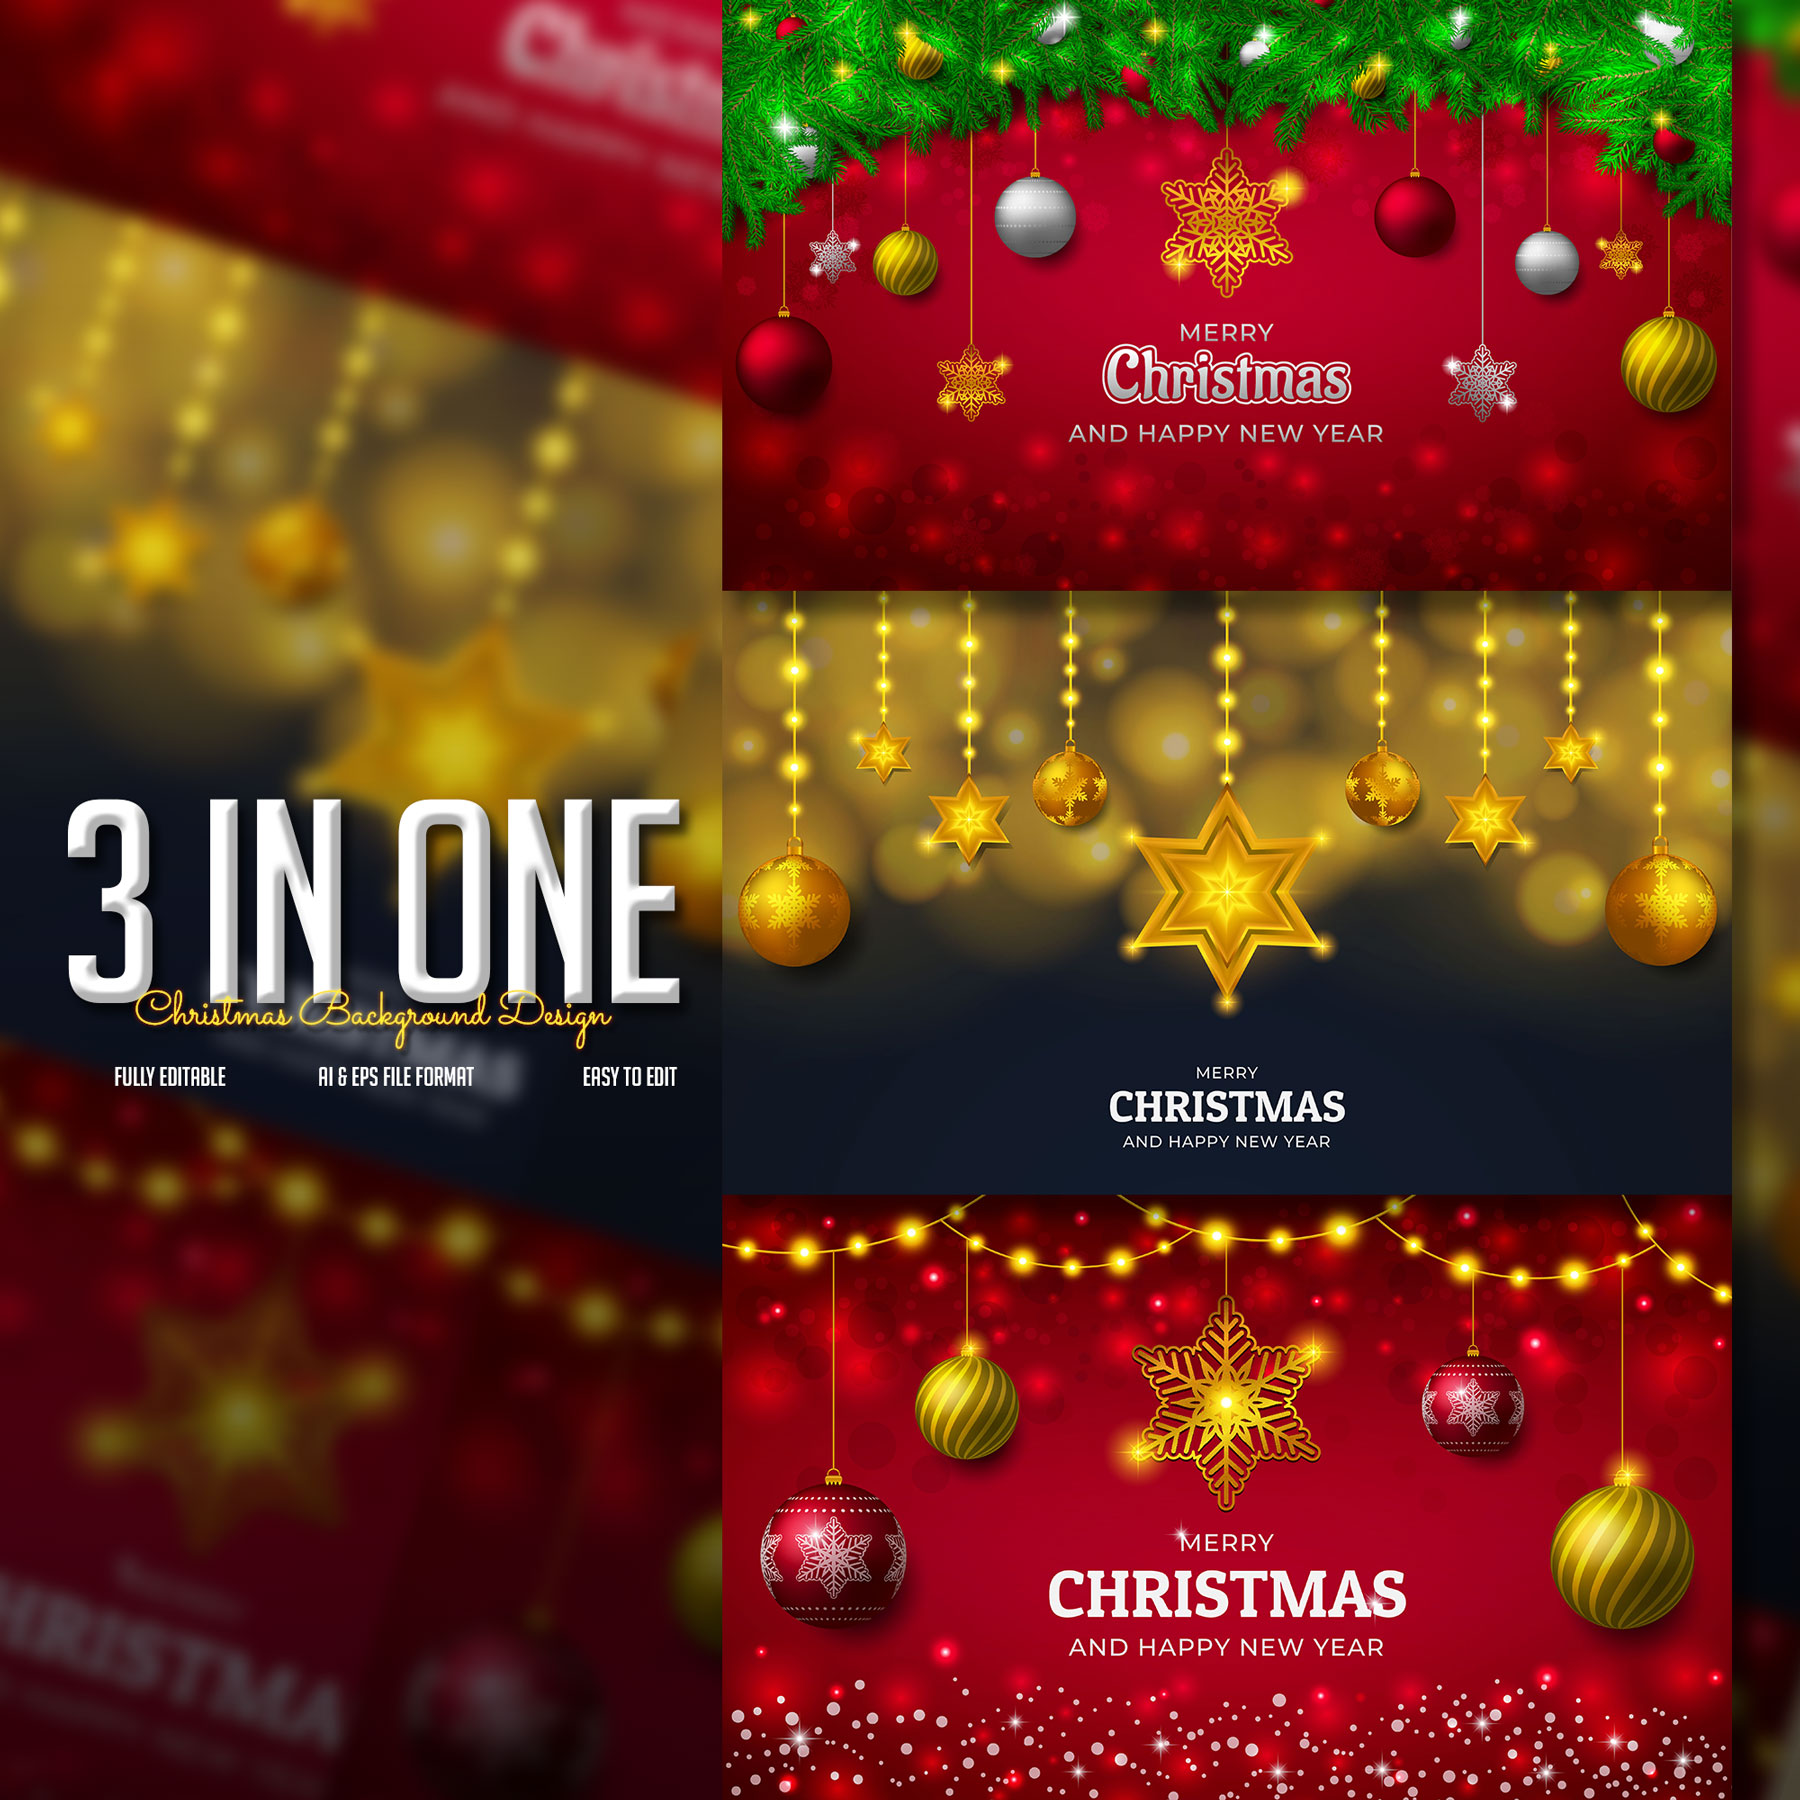 3 In One Christmas Background Design Only In $3 cover image.